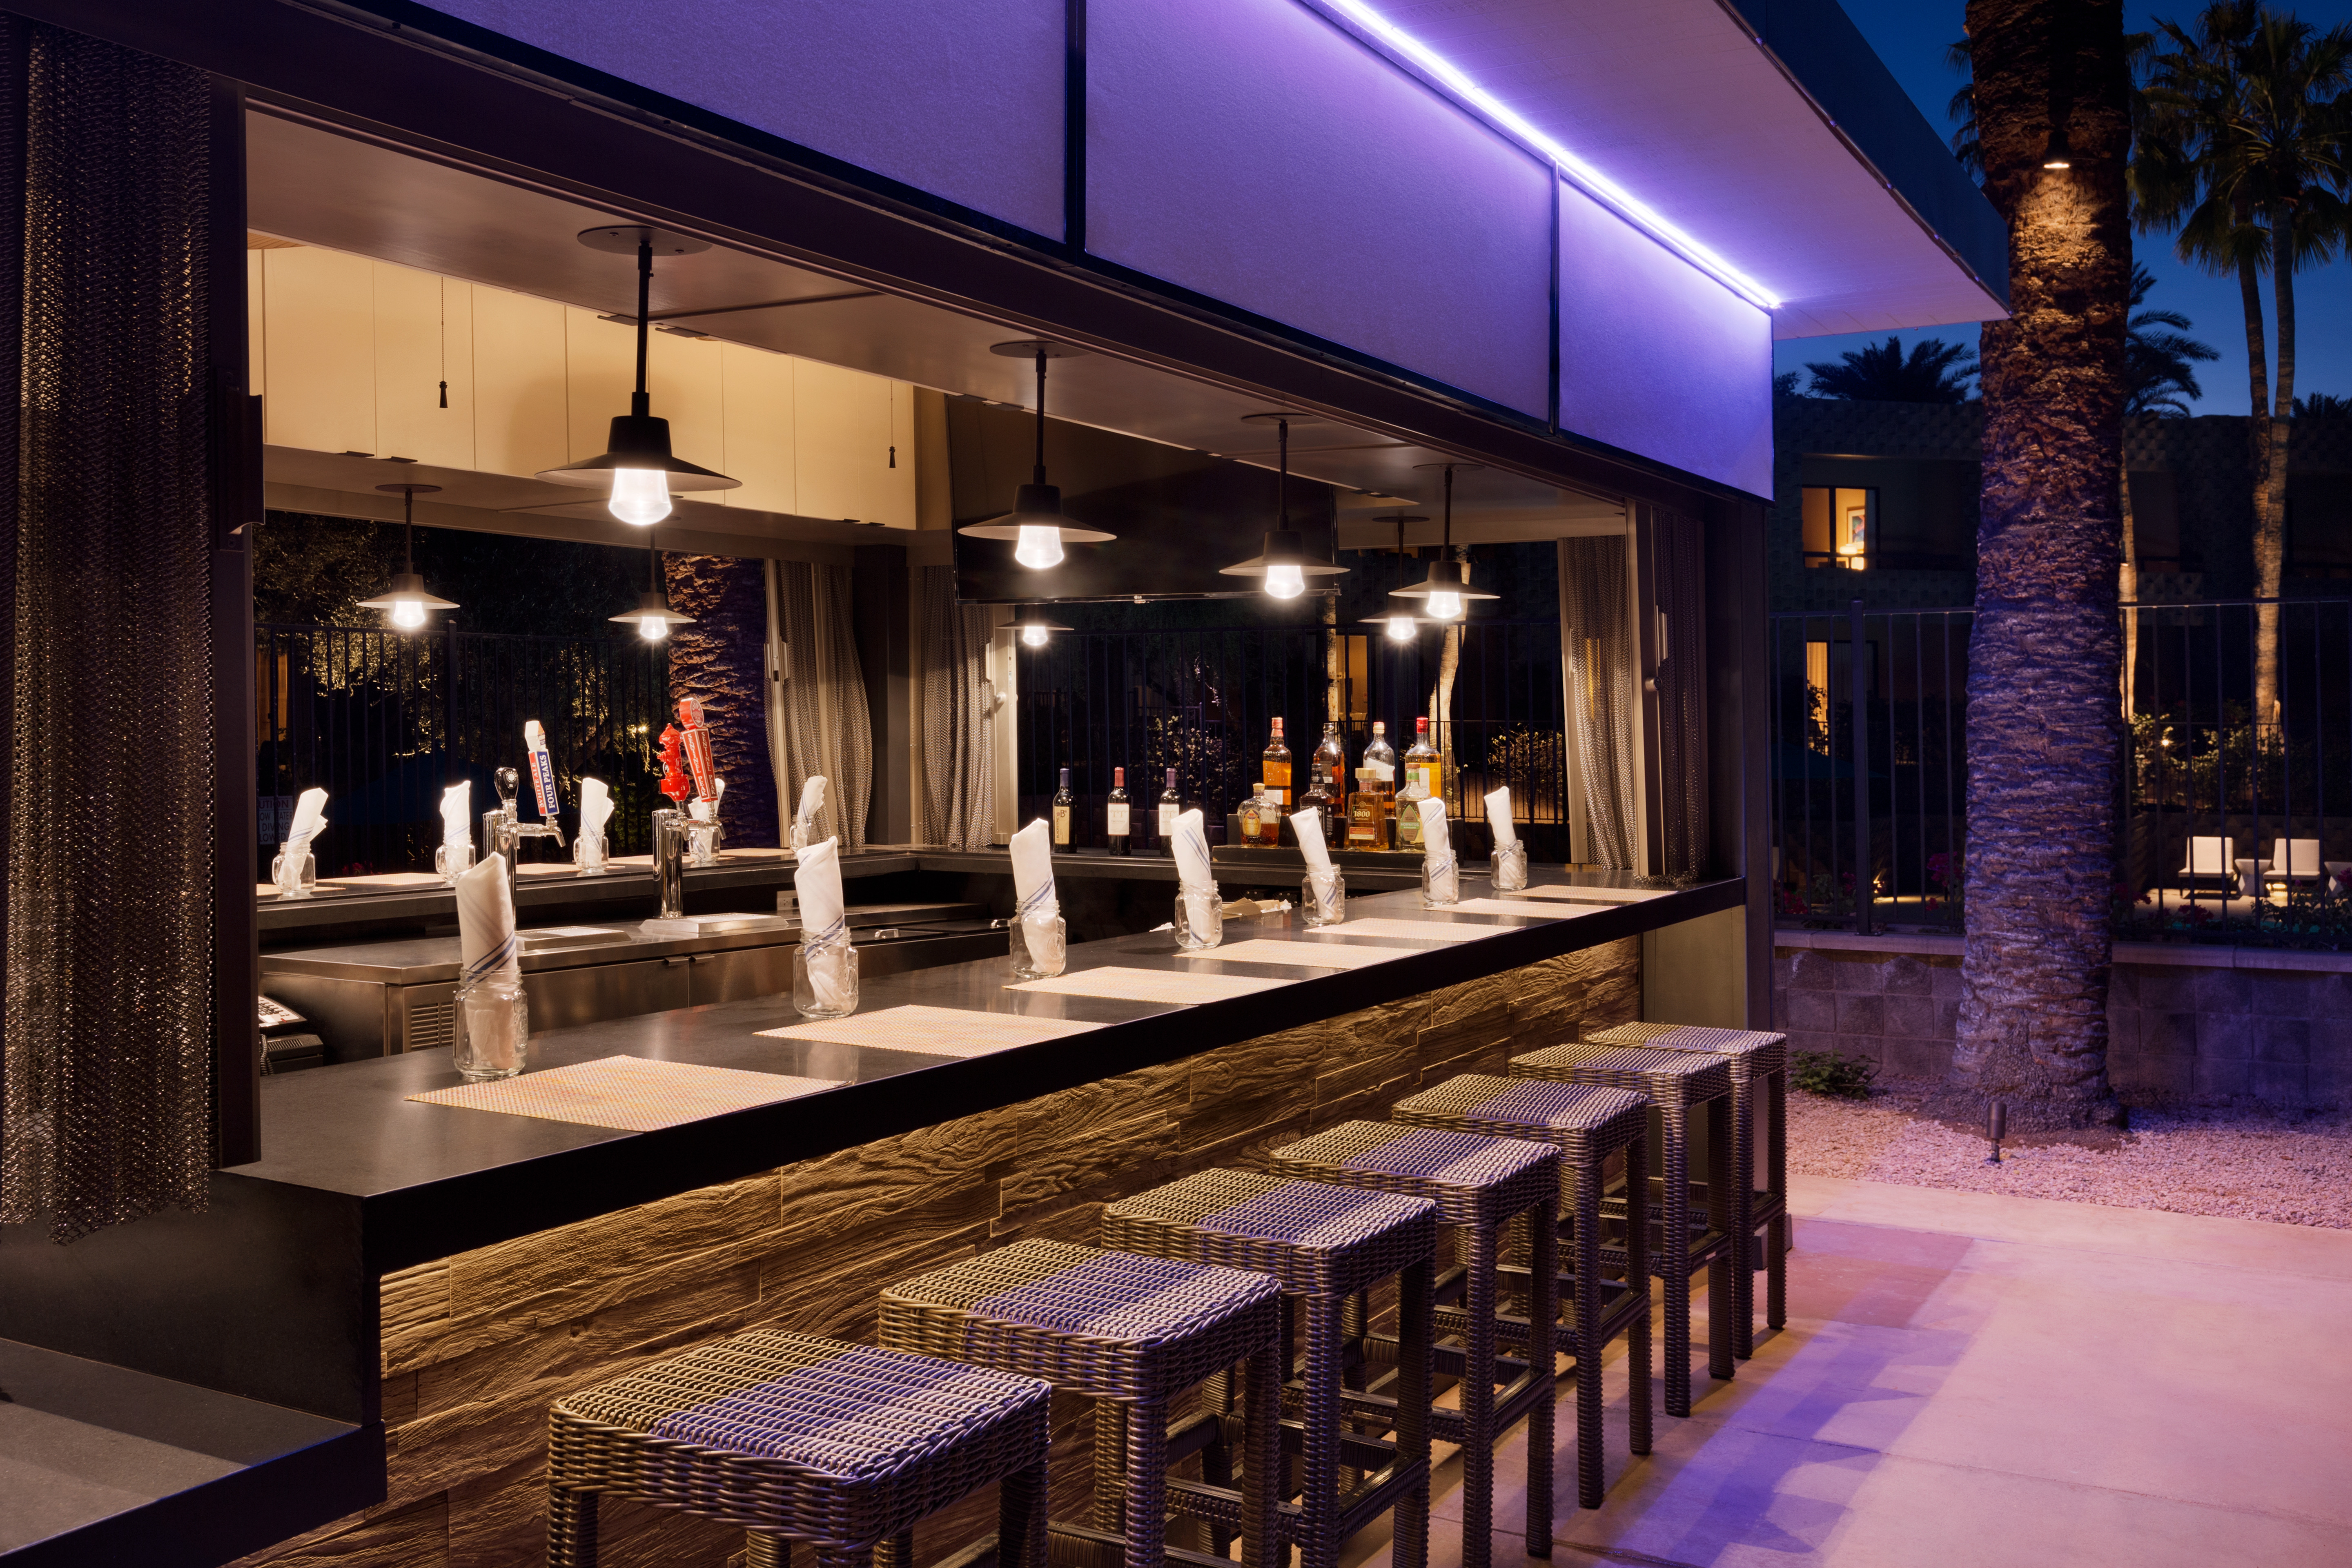 Illuminated Counter Seating at Azure Pool Bar Surrounded by Palm Trees at Night